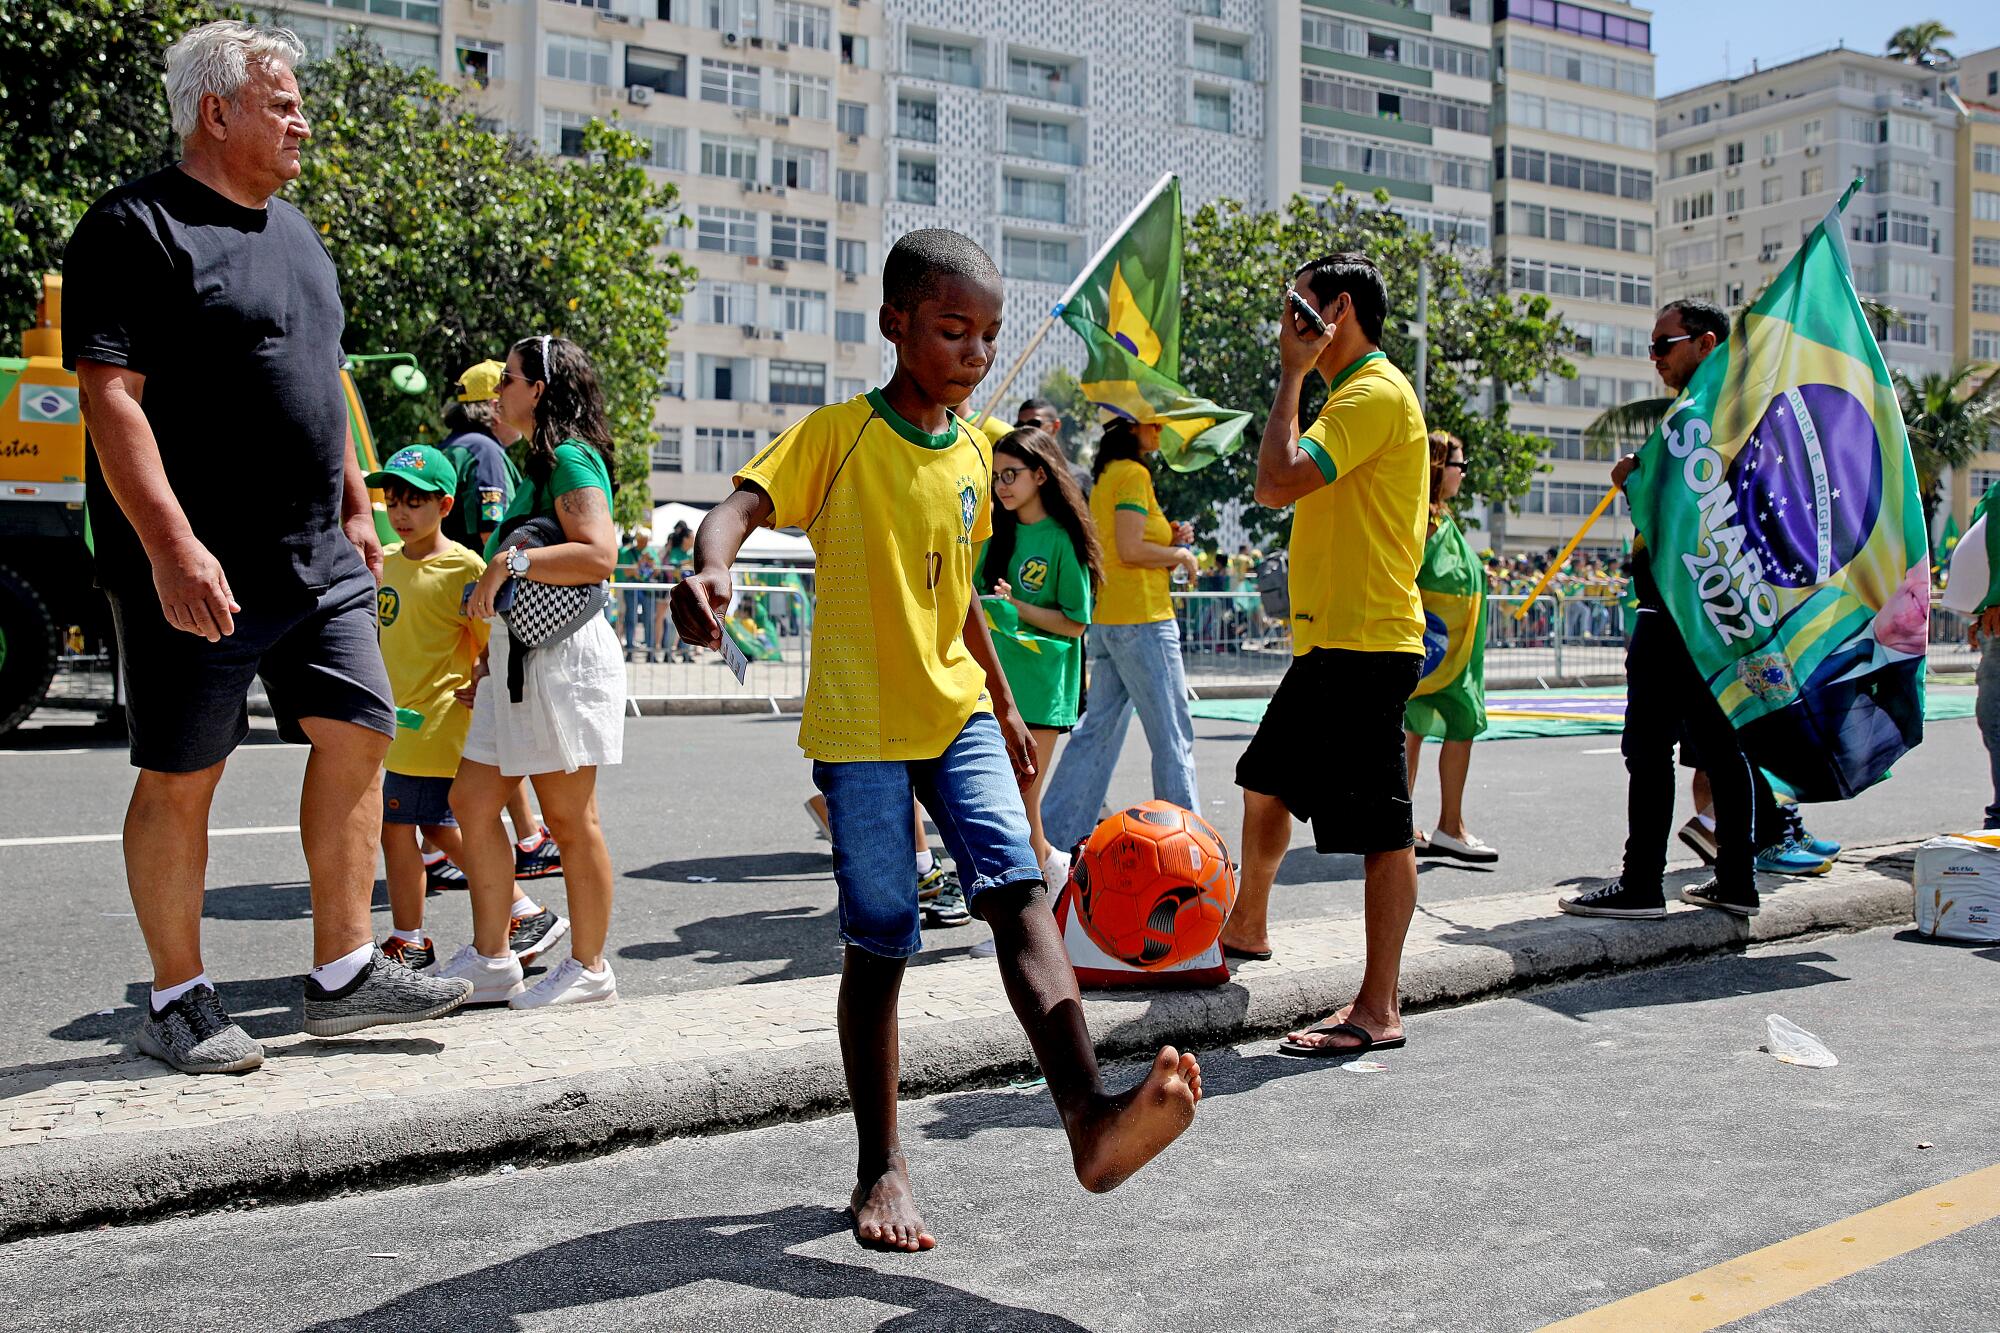  A young boy plays with a soccer ball during rally.